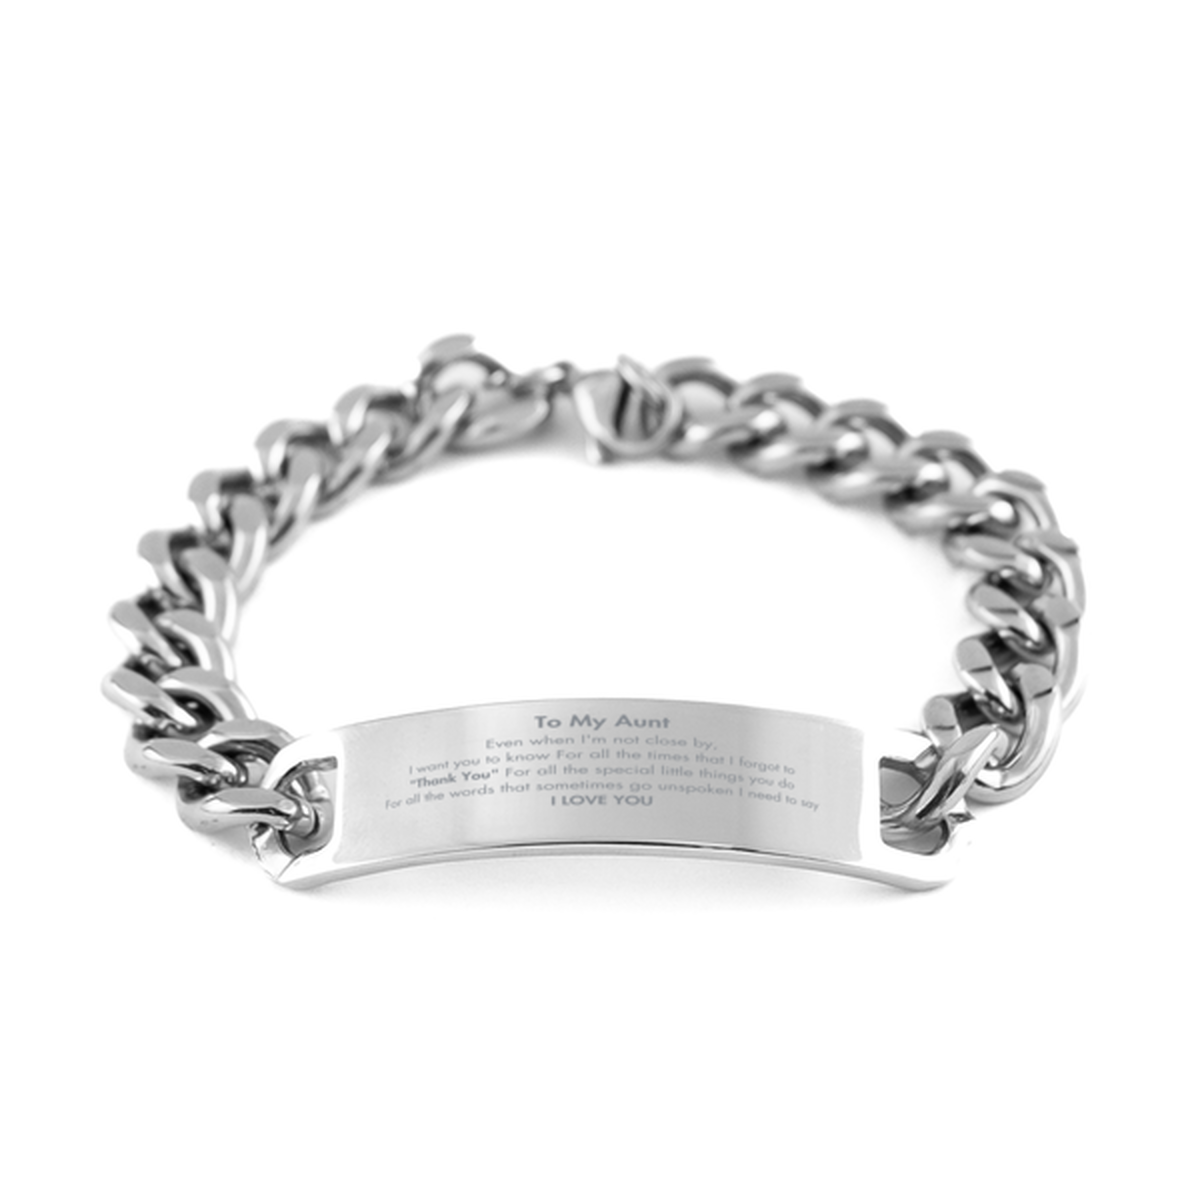 Thank You Gifts for Aunt, Keepsake Cuban Chain Stainless Steel Bracelet Gifts for Aunt Birthday Mother's day Father's Day Aunt For all the words That sometimes go unspoken I need to say I LOVE YOU